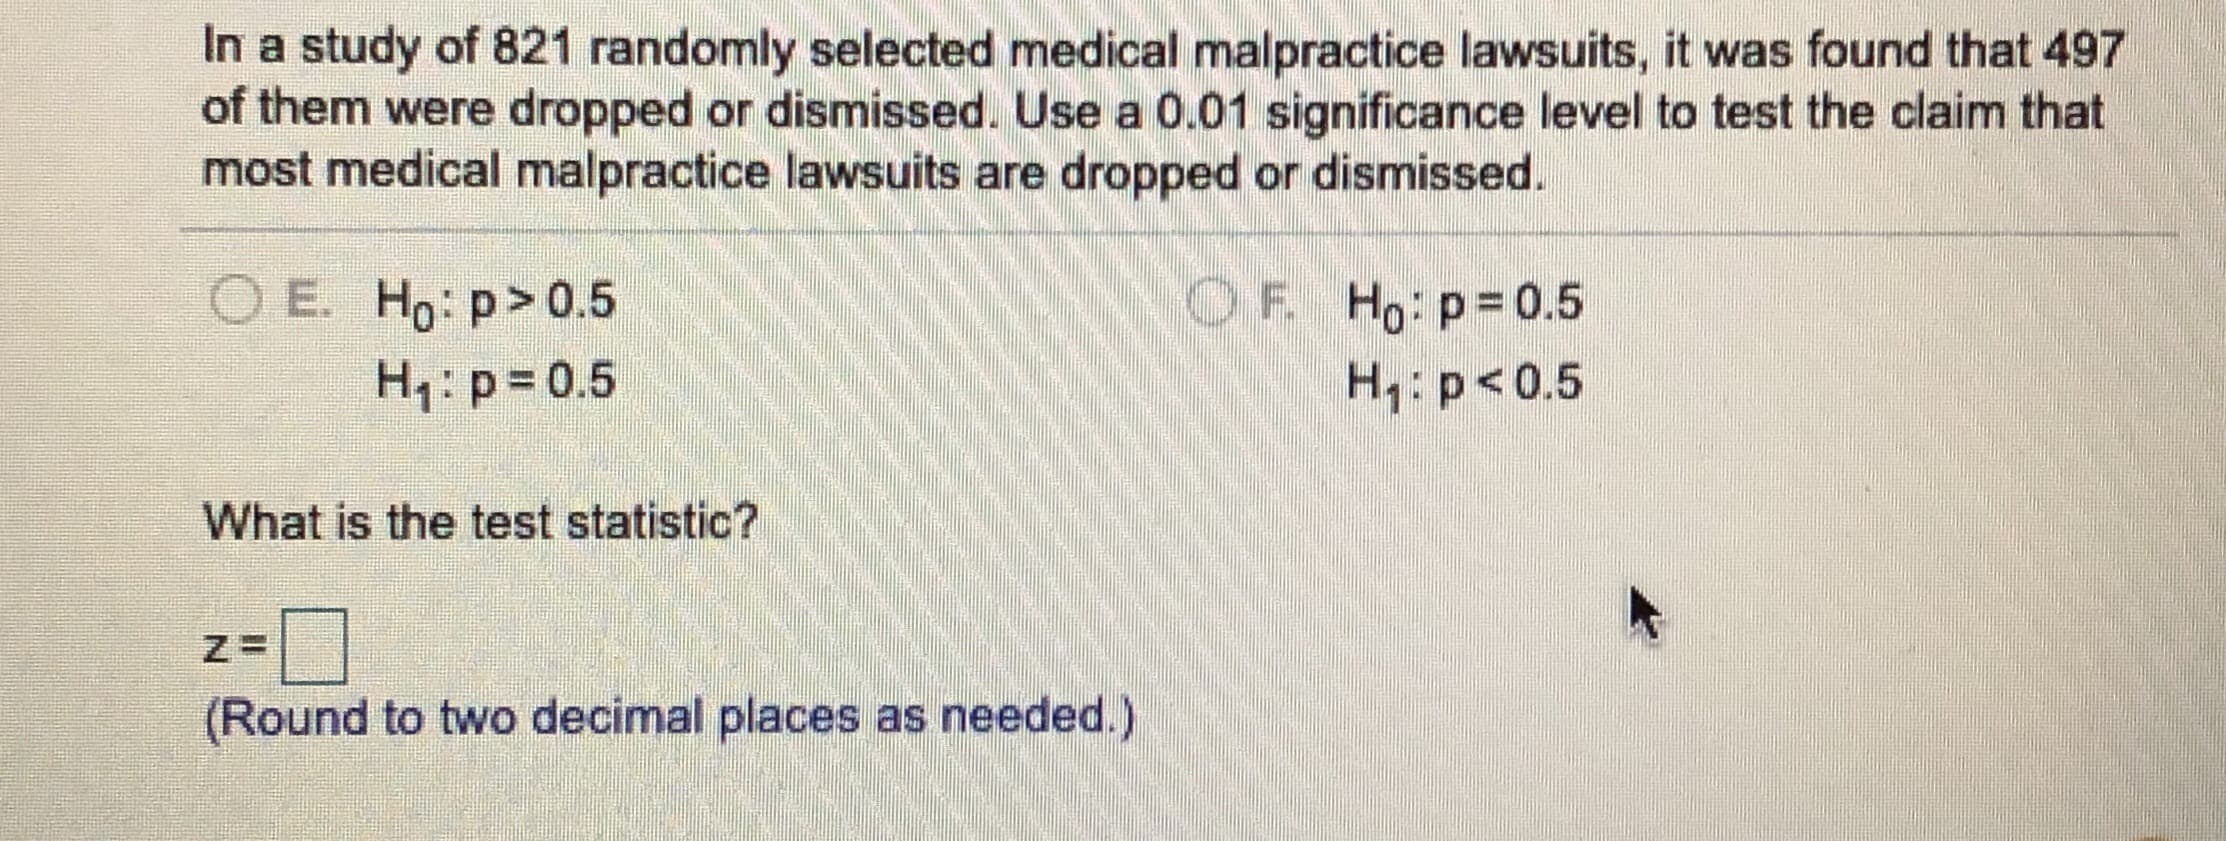 In a study of 821 randomly selected medical malpractice lawsuits, it was found that 497
of them were dropped or dismissed. Use a 0.01 significance level to test the claim that
most medical malpractice lawsuits are dropped or dismissed.
O E. Ho: p>0.5
H,: p= 0.5
OF Ho p=0.5
H1: p<0.5
What is the test statistic?
(Round to two decimal places as needed.)
